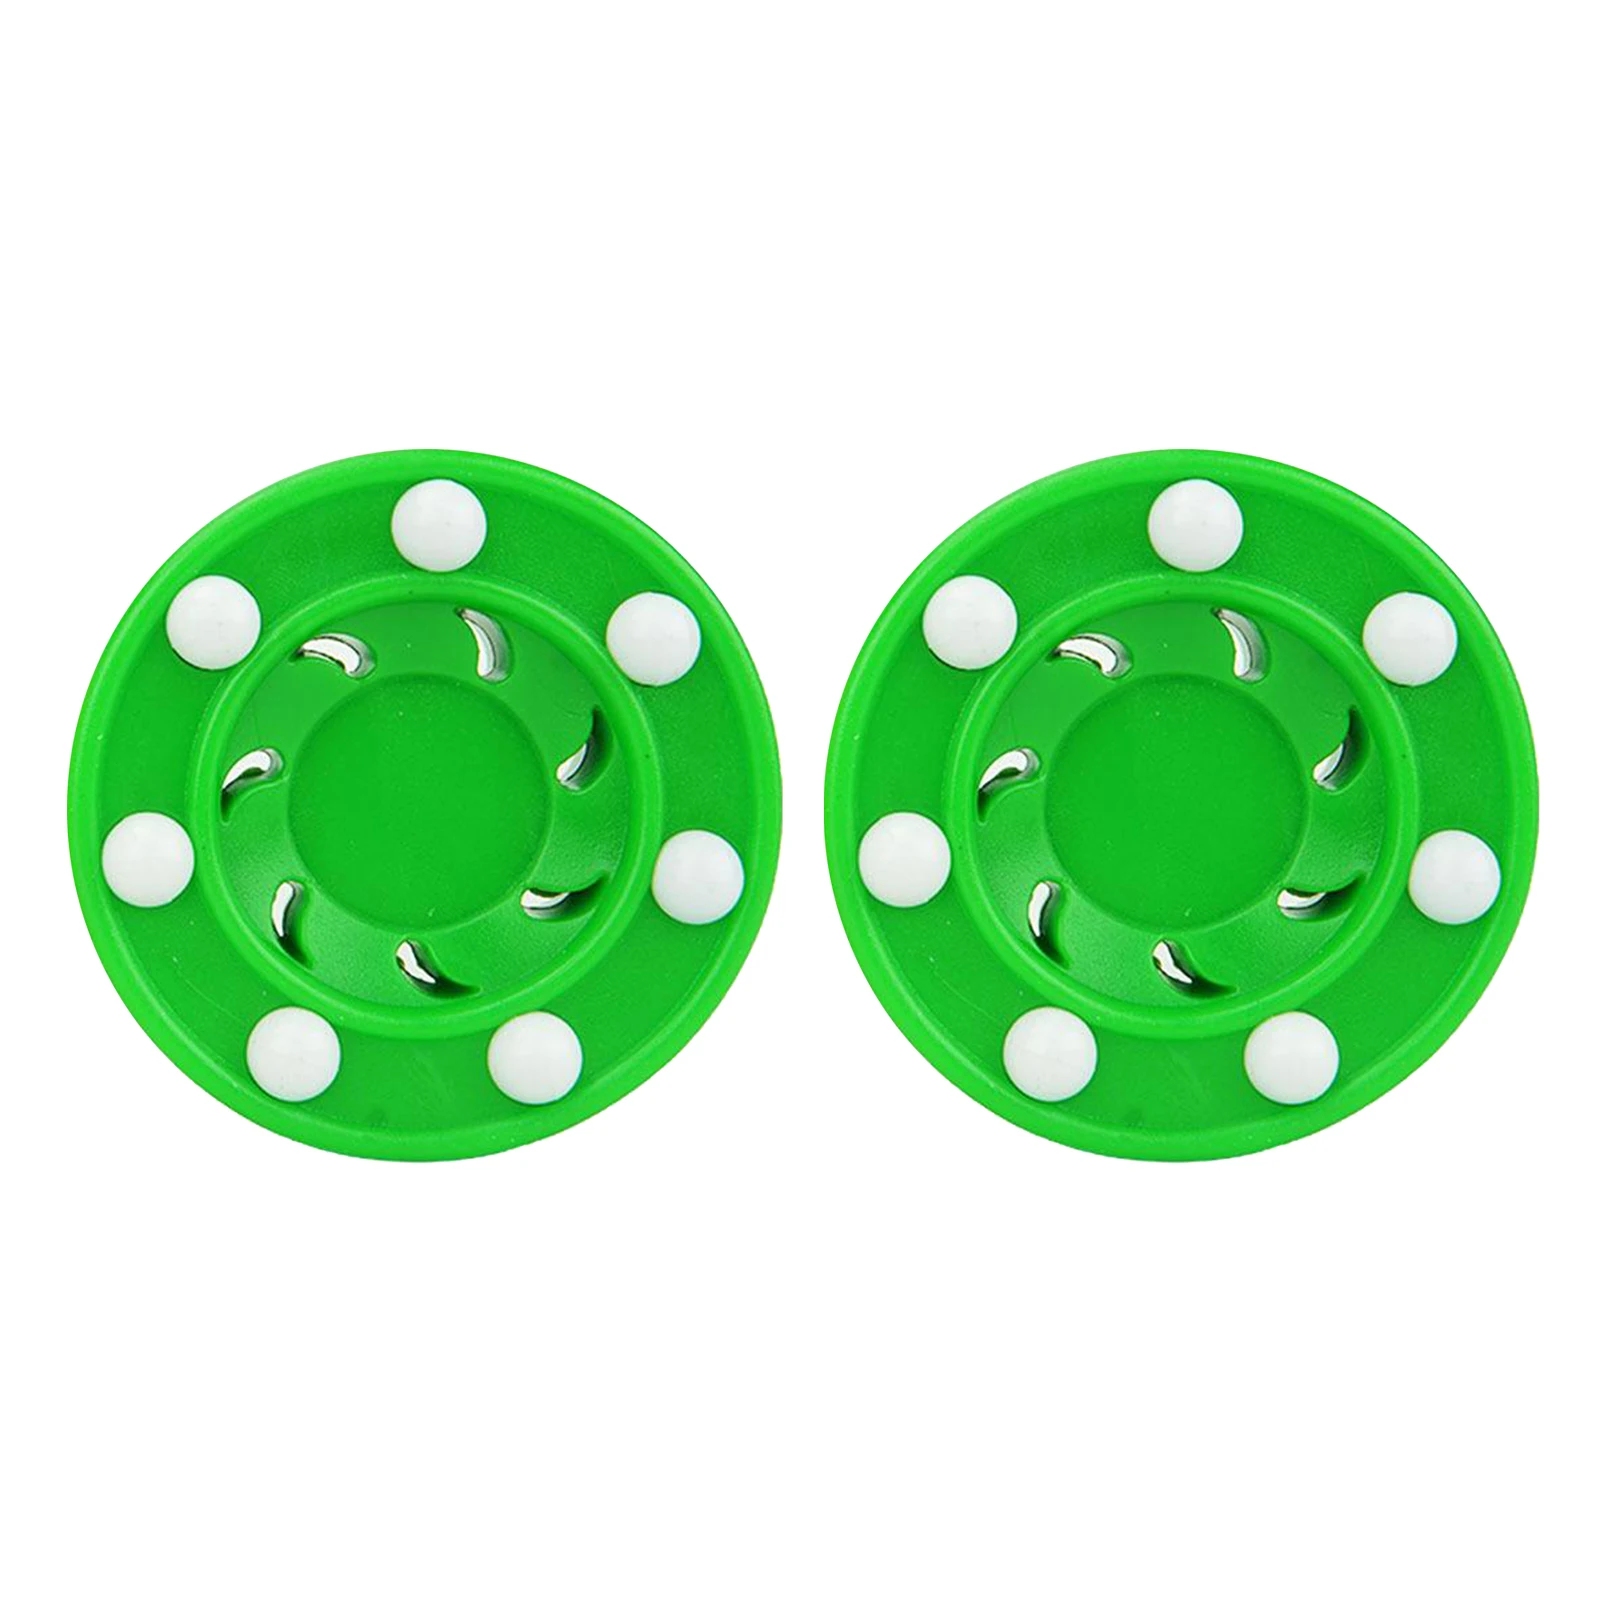 2x Sports Street Roller Hockey Game Puck for Practicing and Classic Training